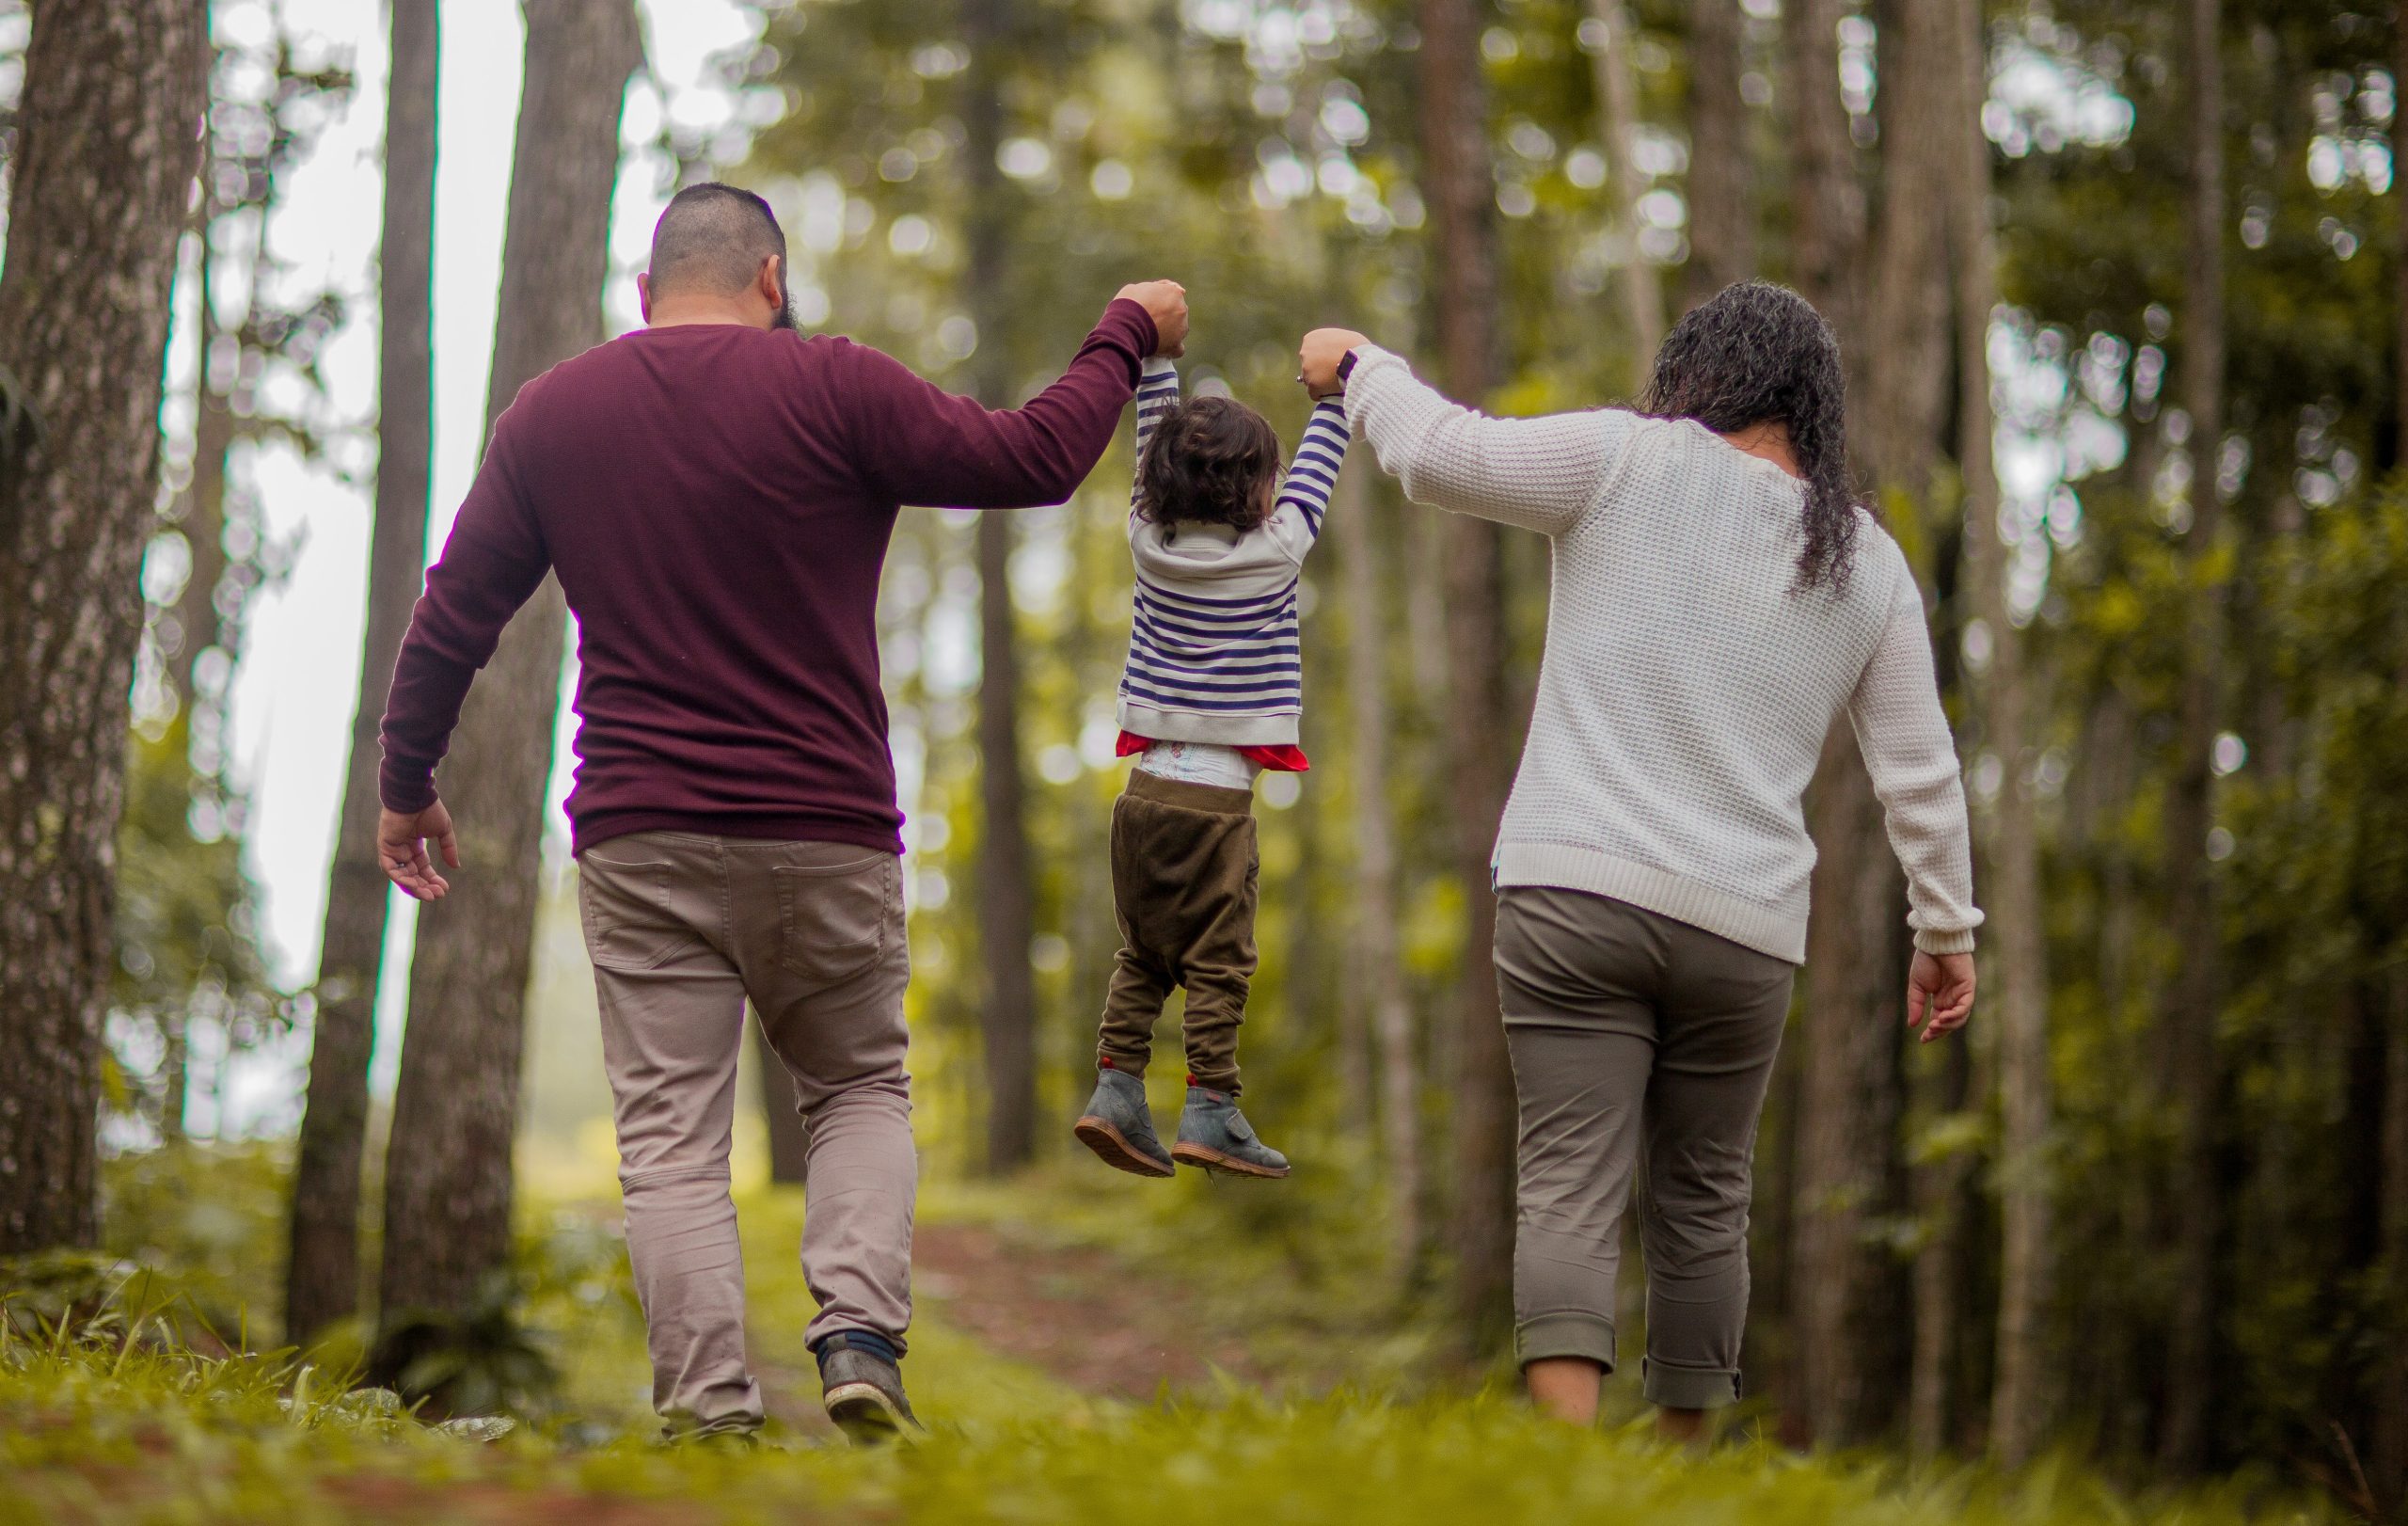 Photo by Caleb Oquendo: https://www.pexels.com/photo/man-and-woman-carrying-toddler-3038369/